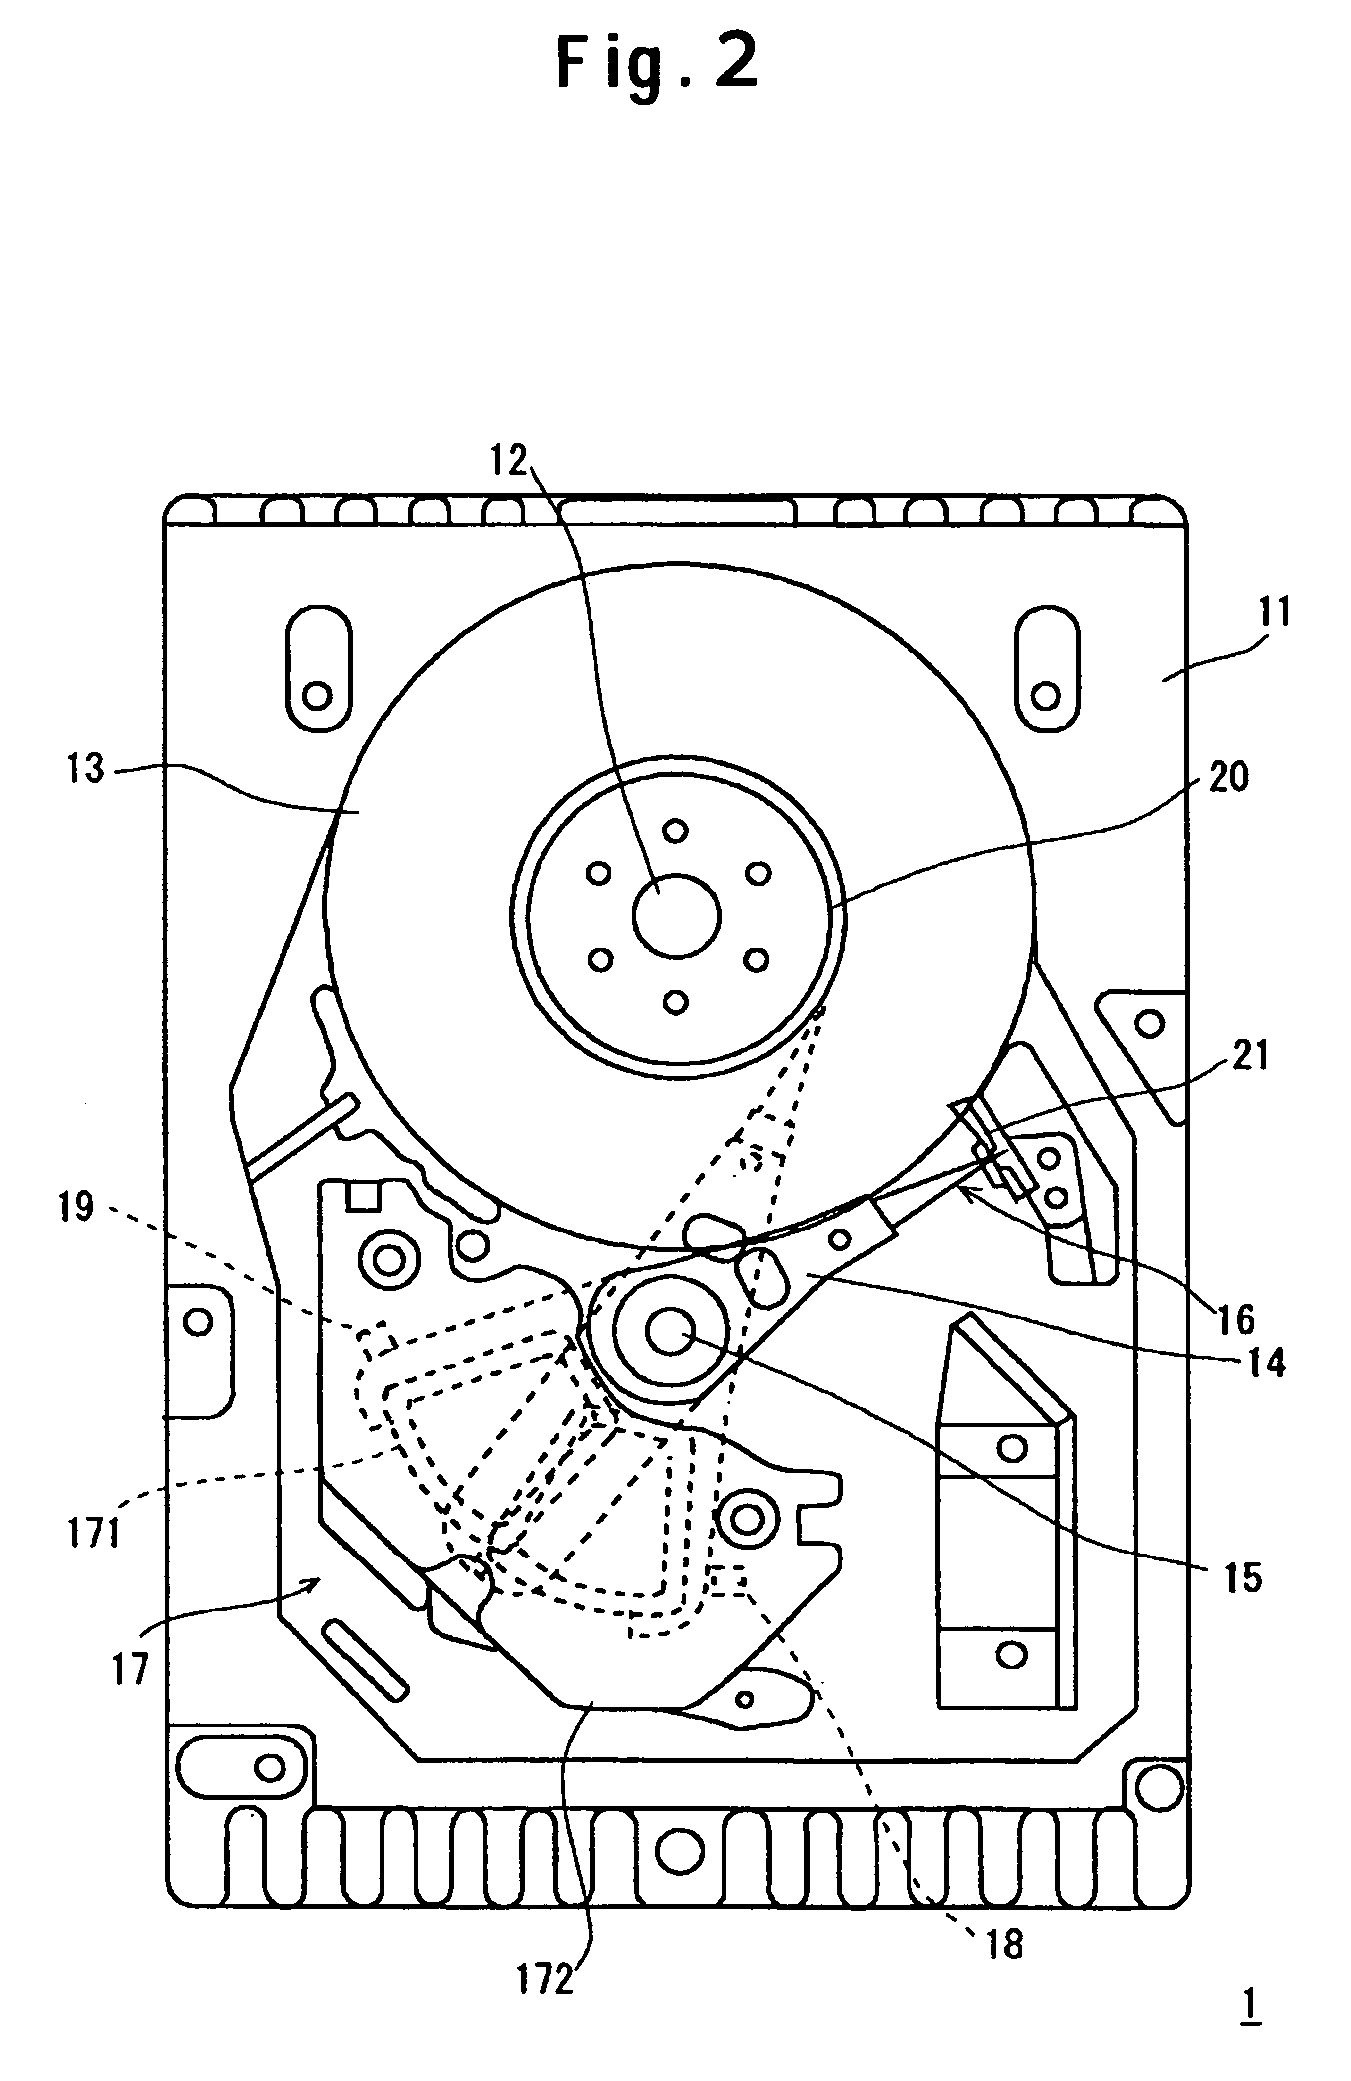 Method of writing patterns onto a recording disk, and data storage device